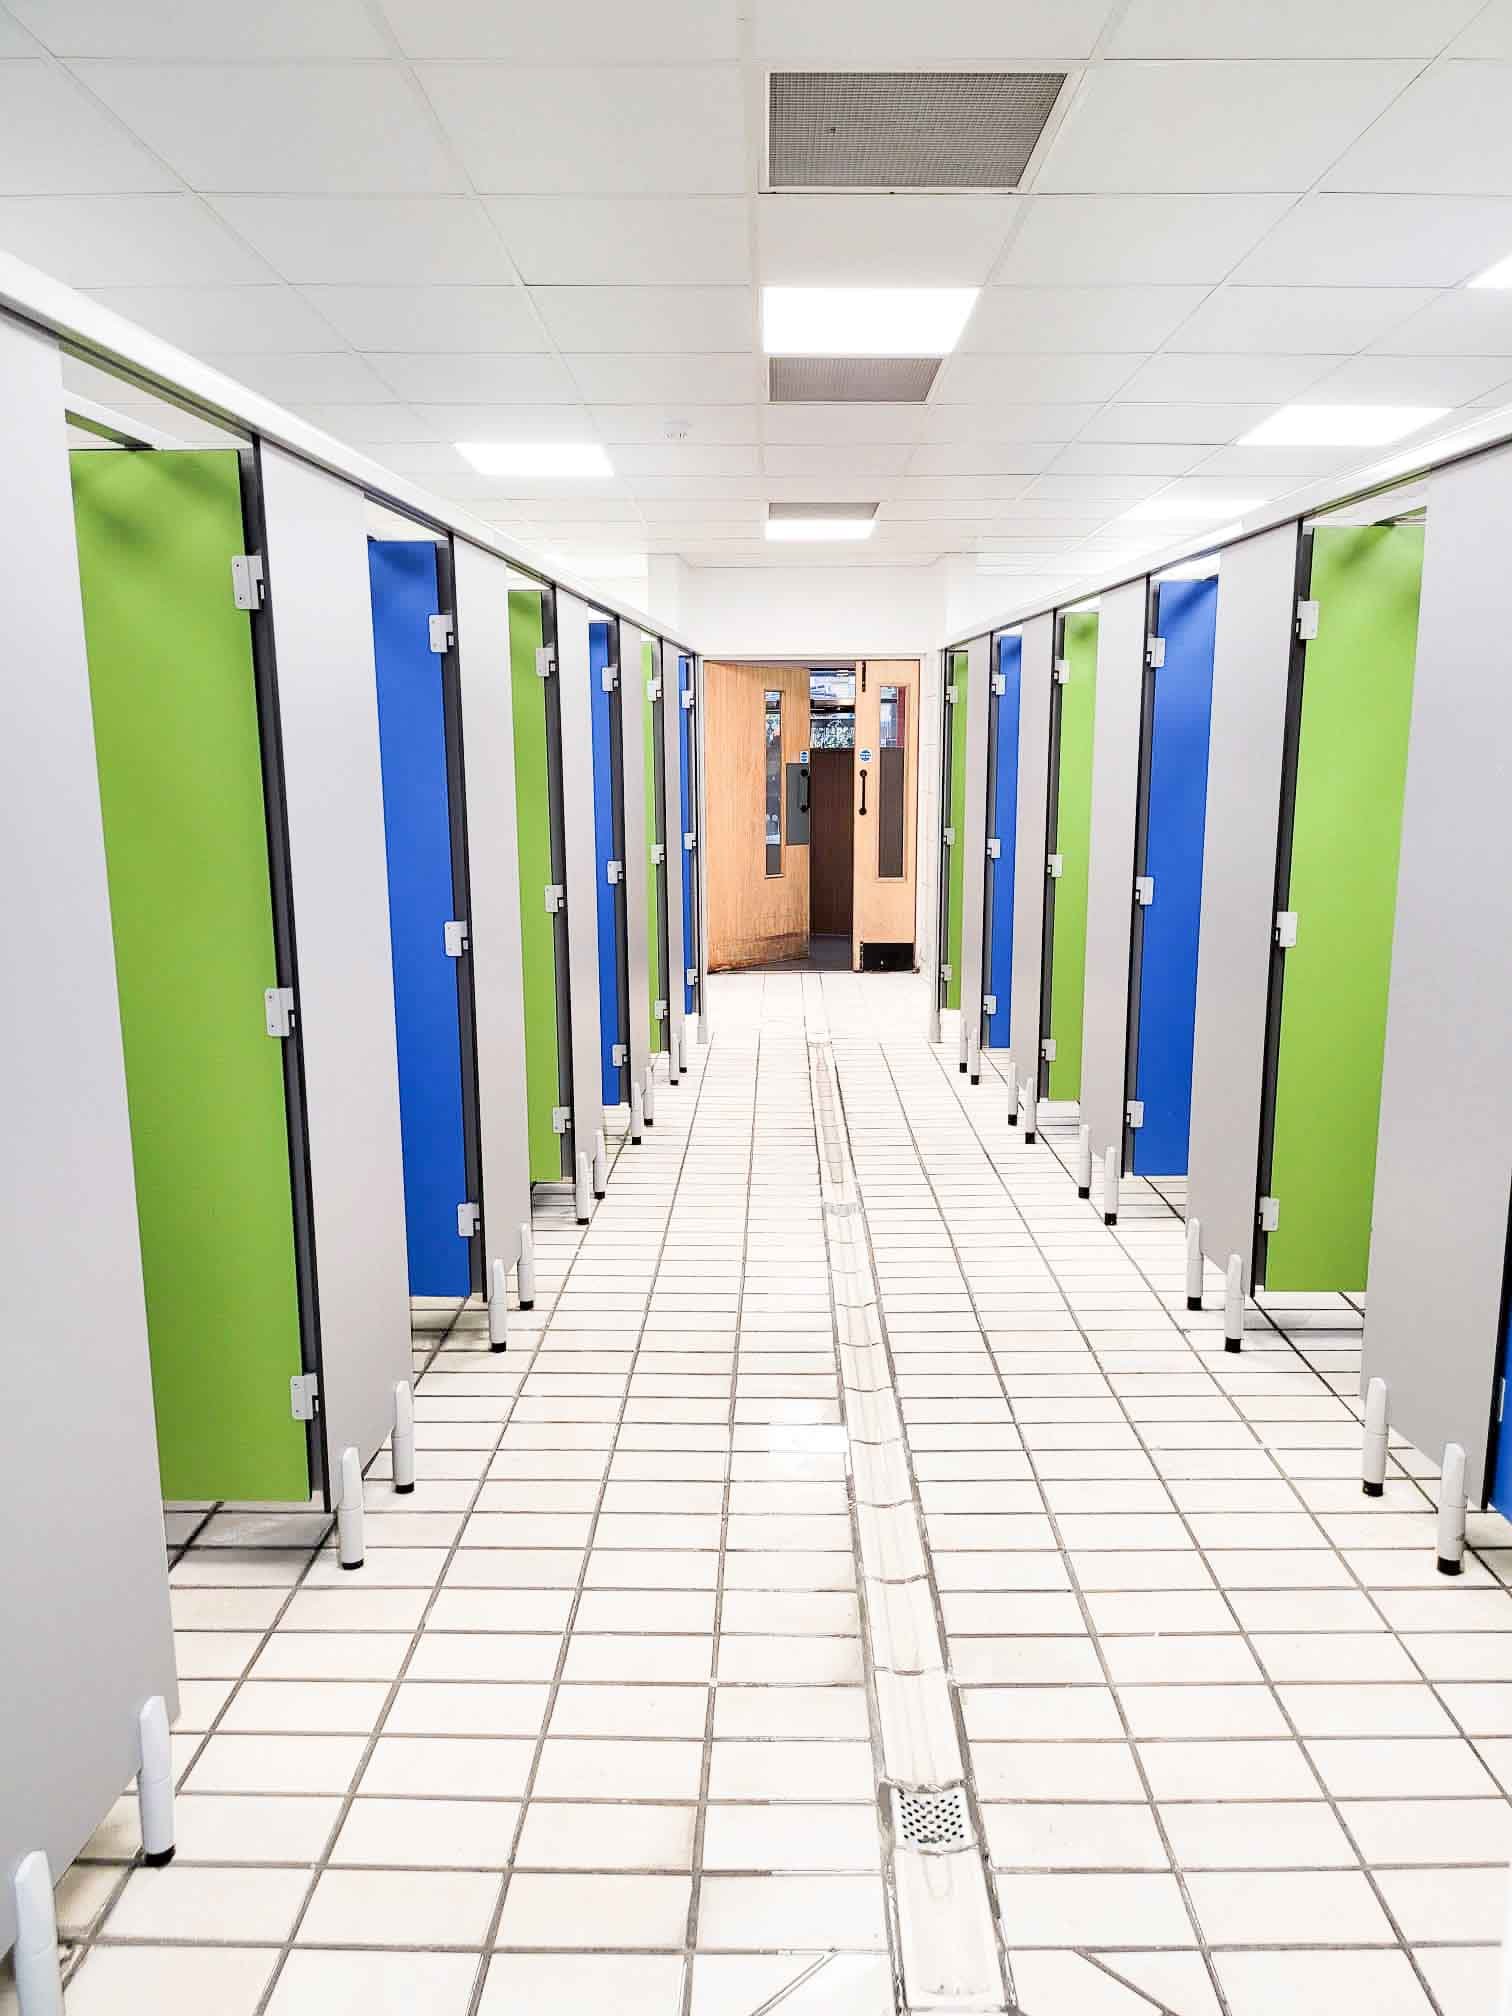 green and blue changing cubicle block at herons leisure centre.jpg